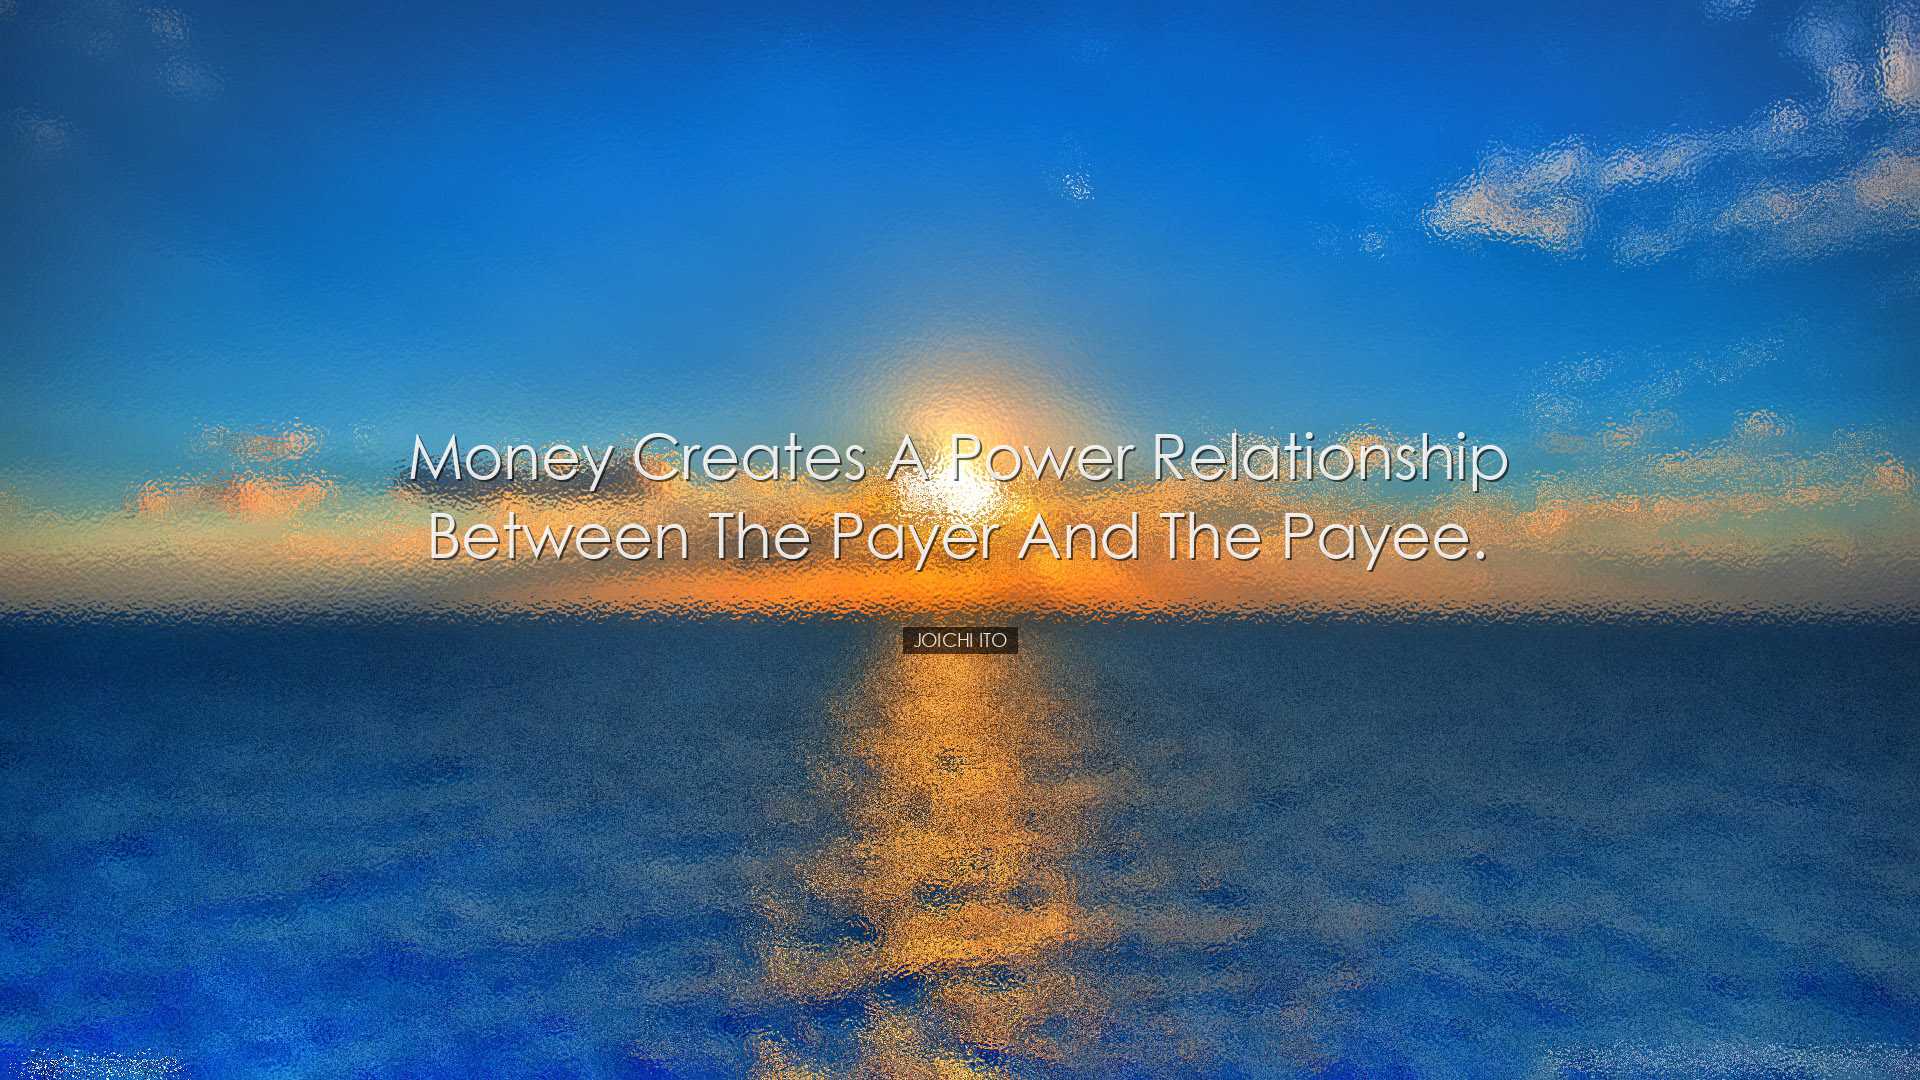 Money creates a power relationship between the payer and the payee